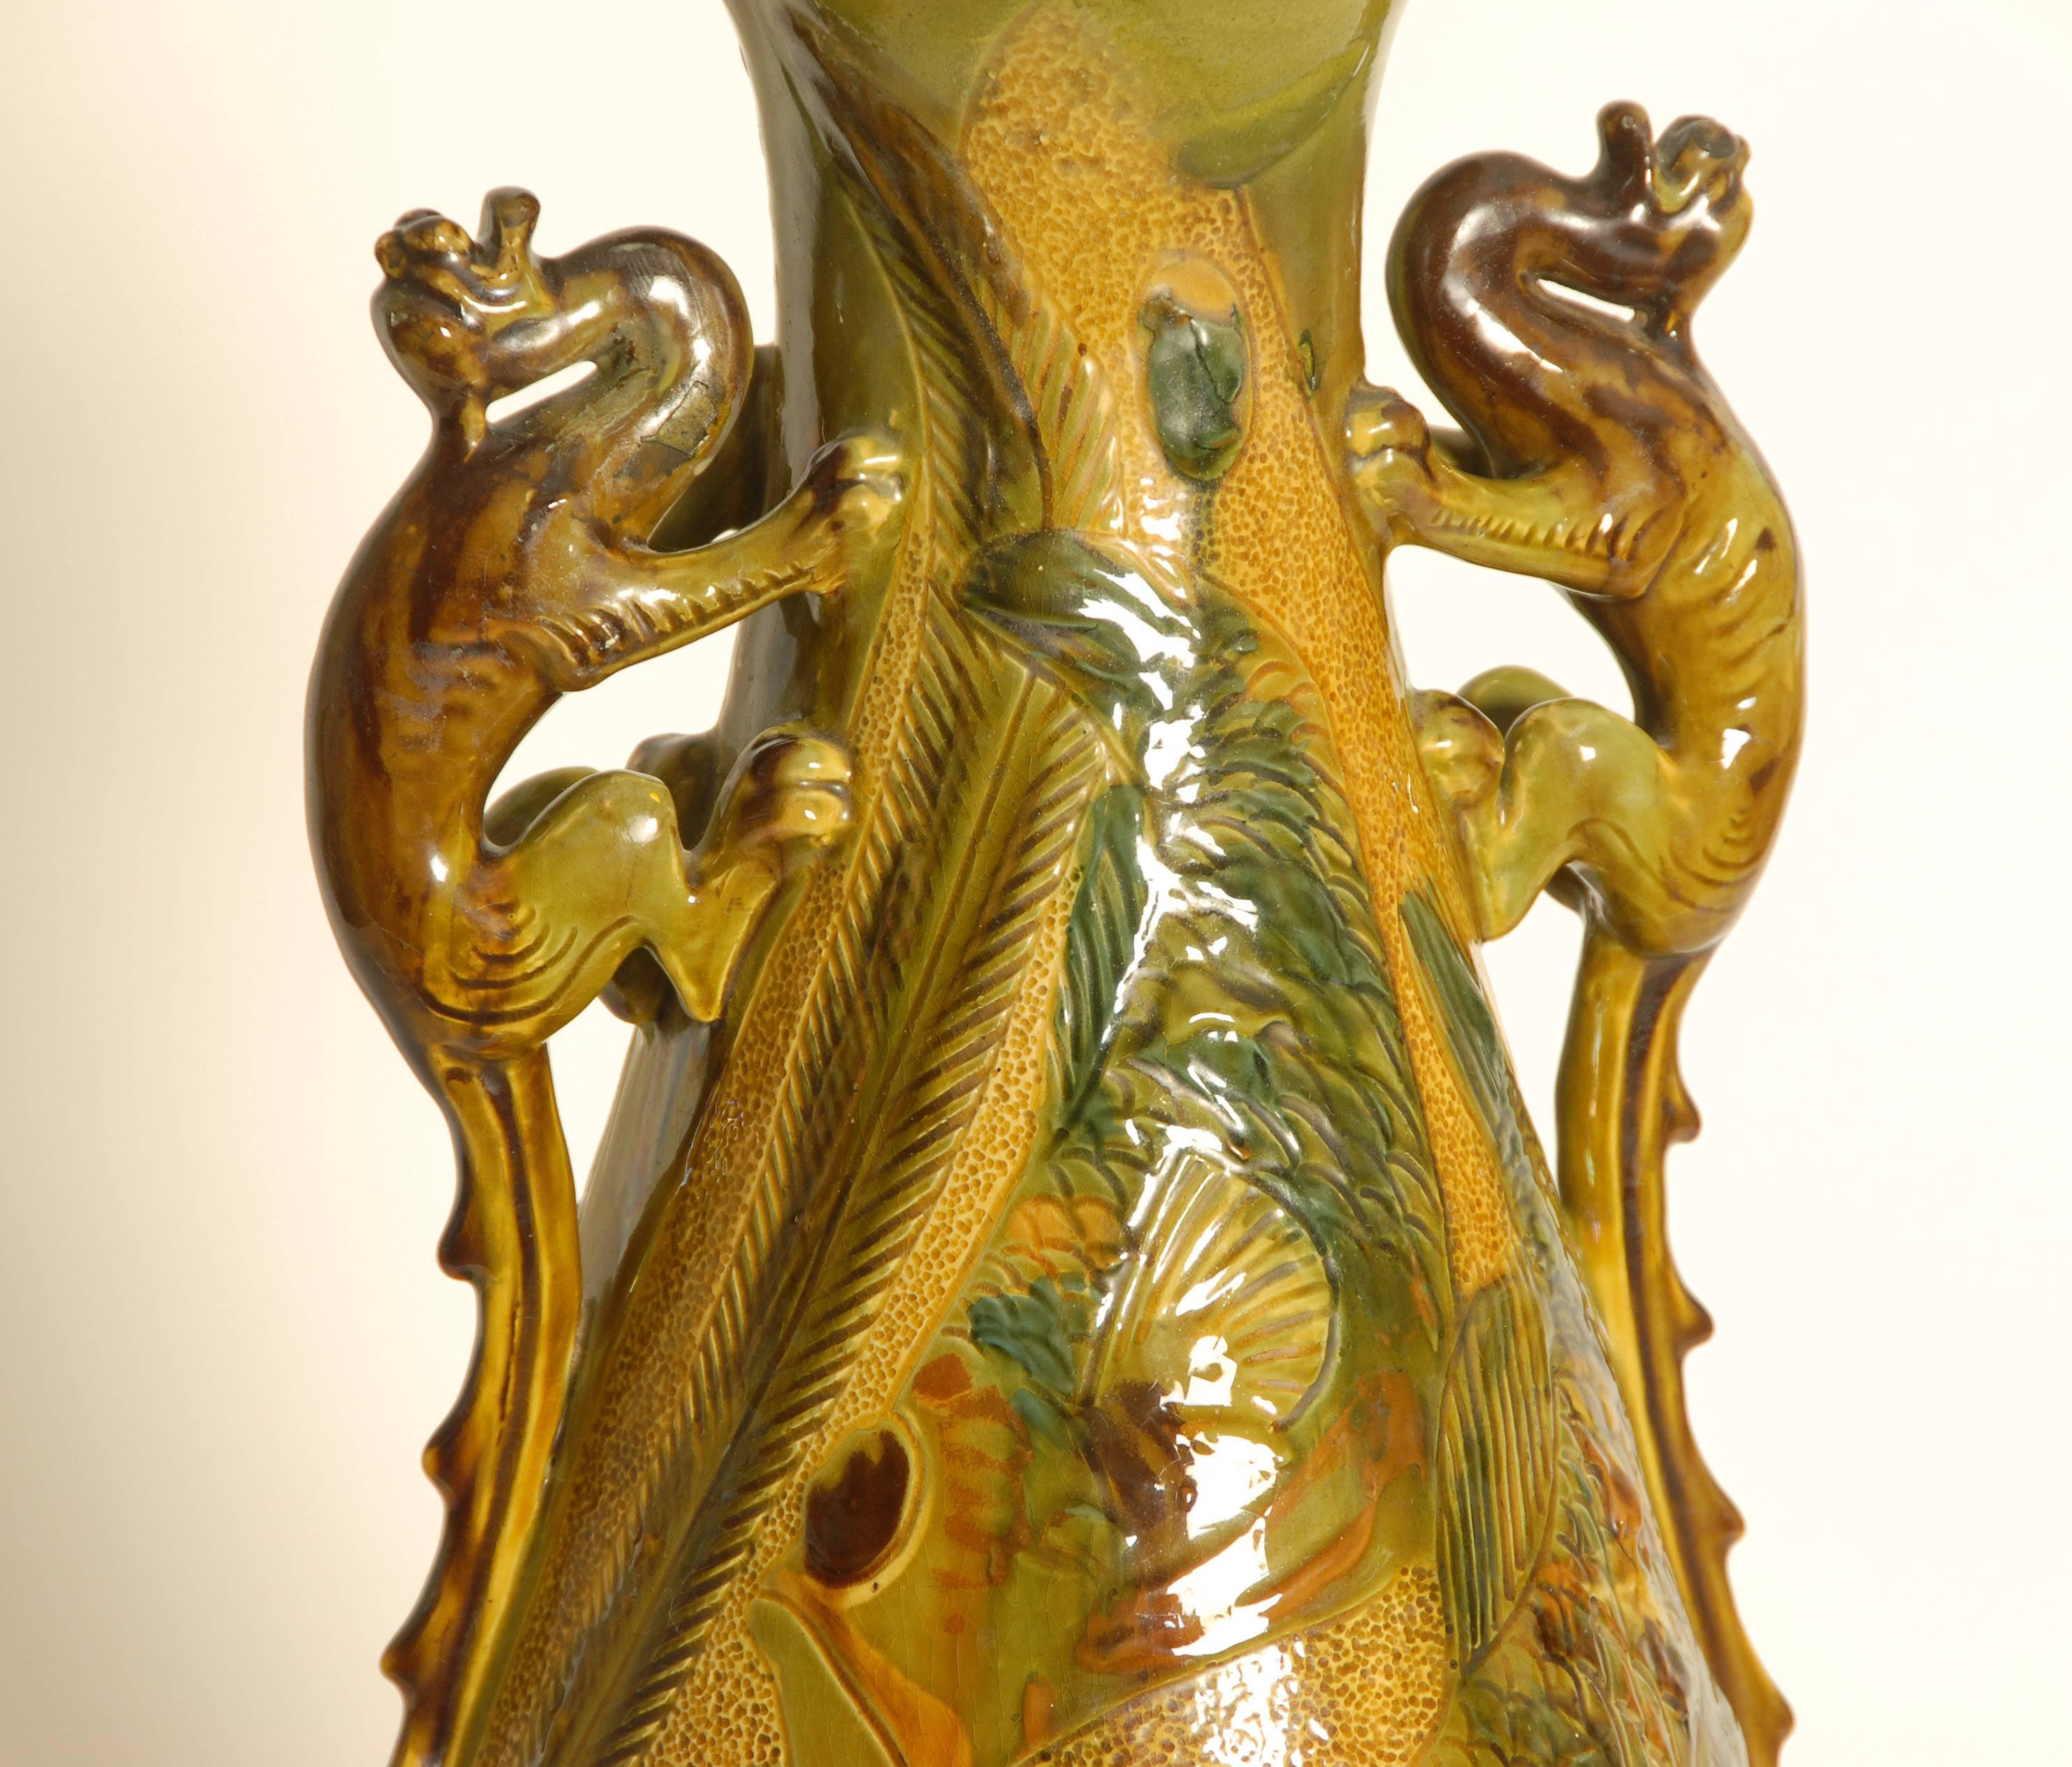 Early 20th Century Art Nouveau or Arts & Crafts Lizard Handle Vase by Brannam In Excellent Condition For Sale In Brighton, GB